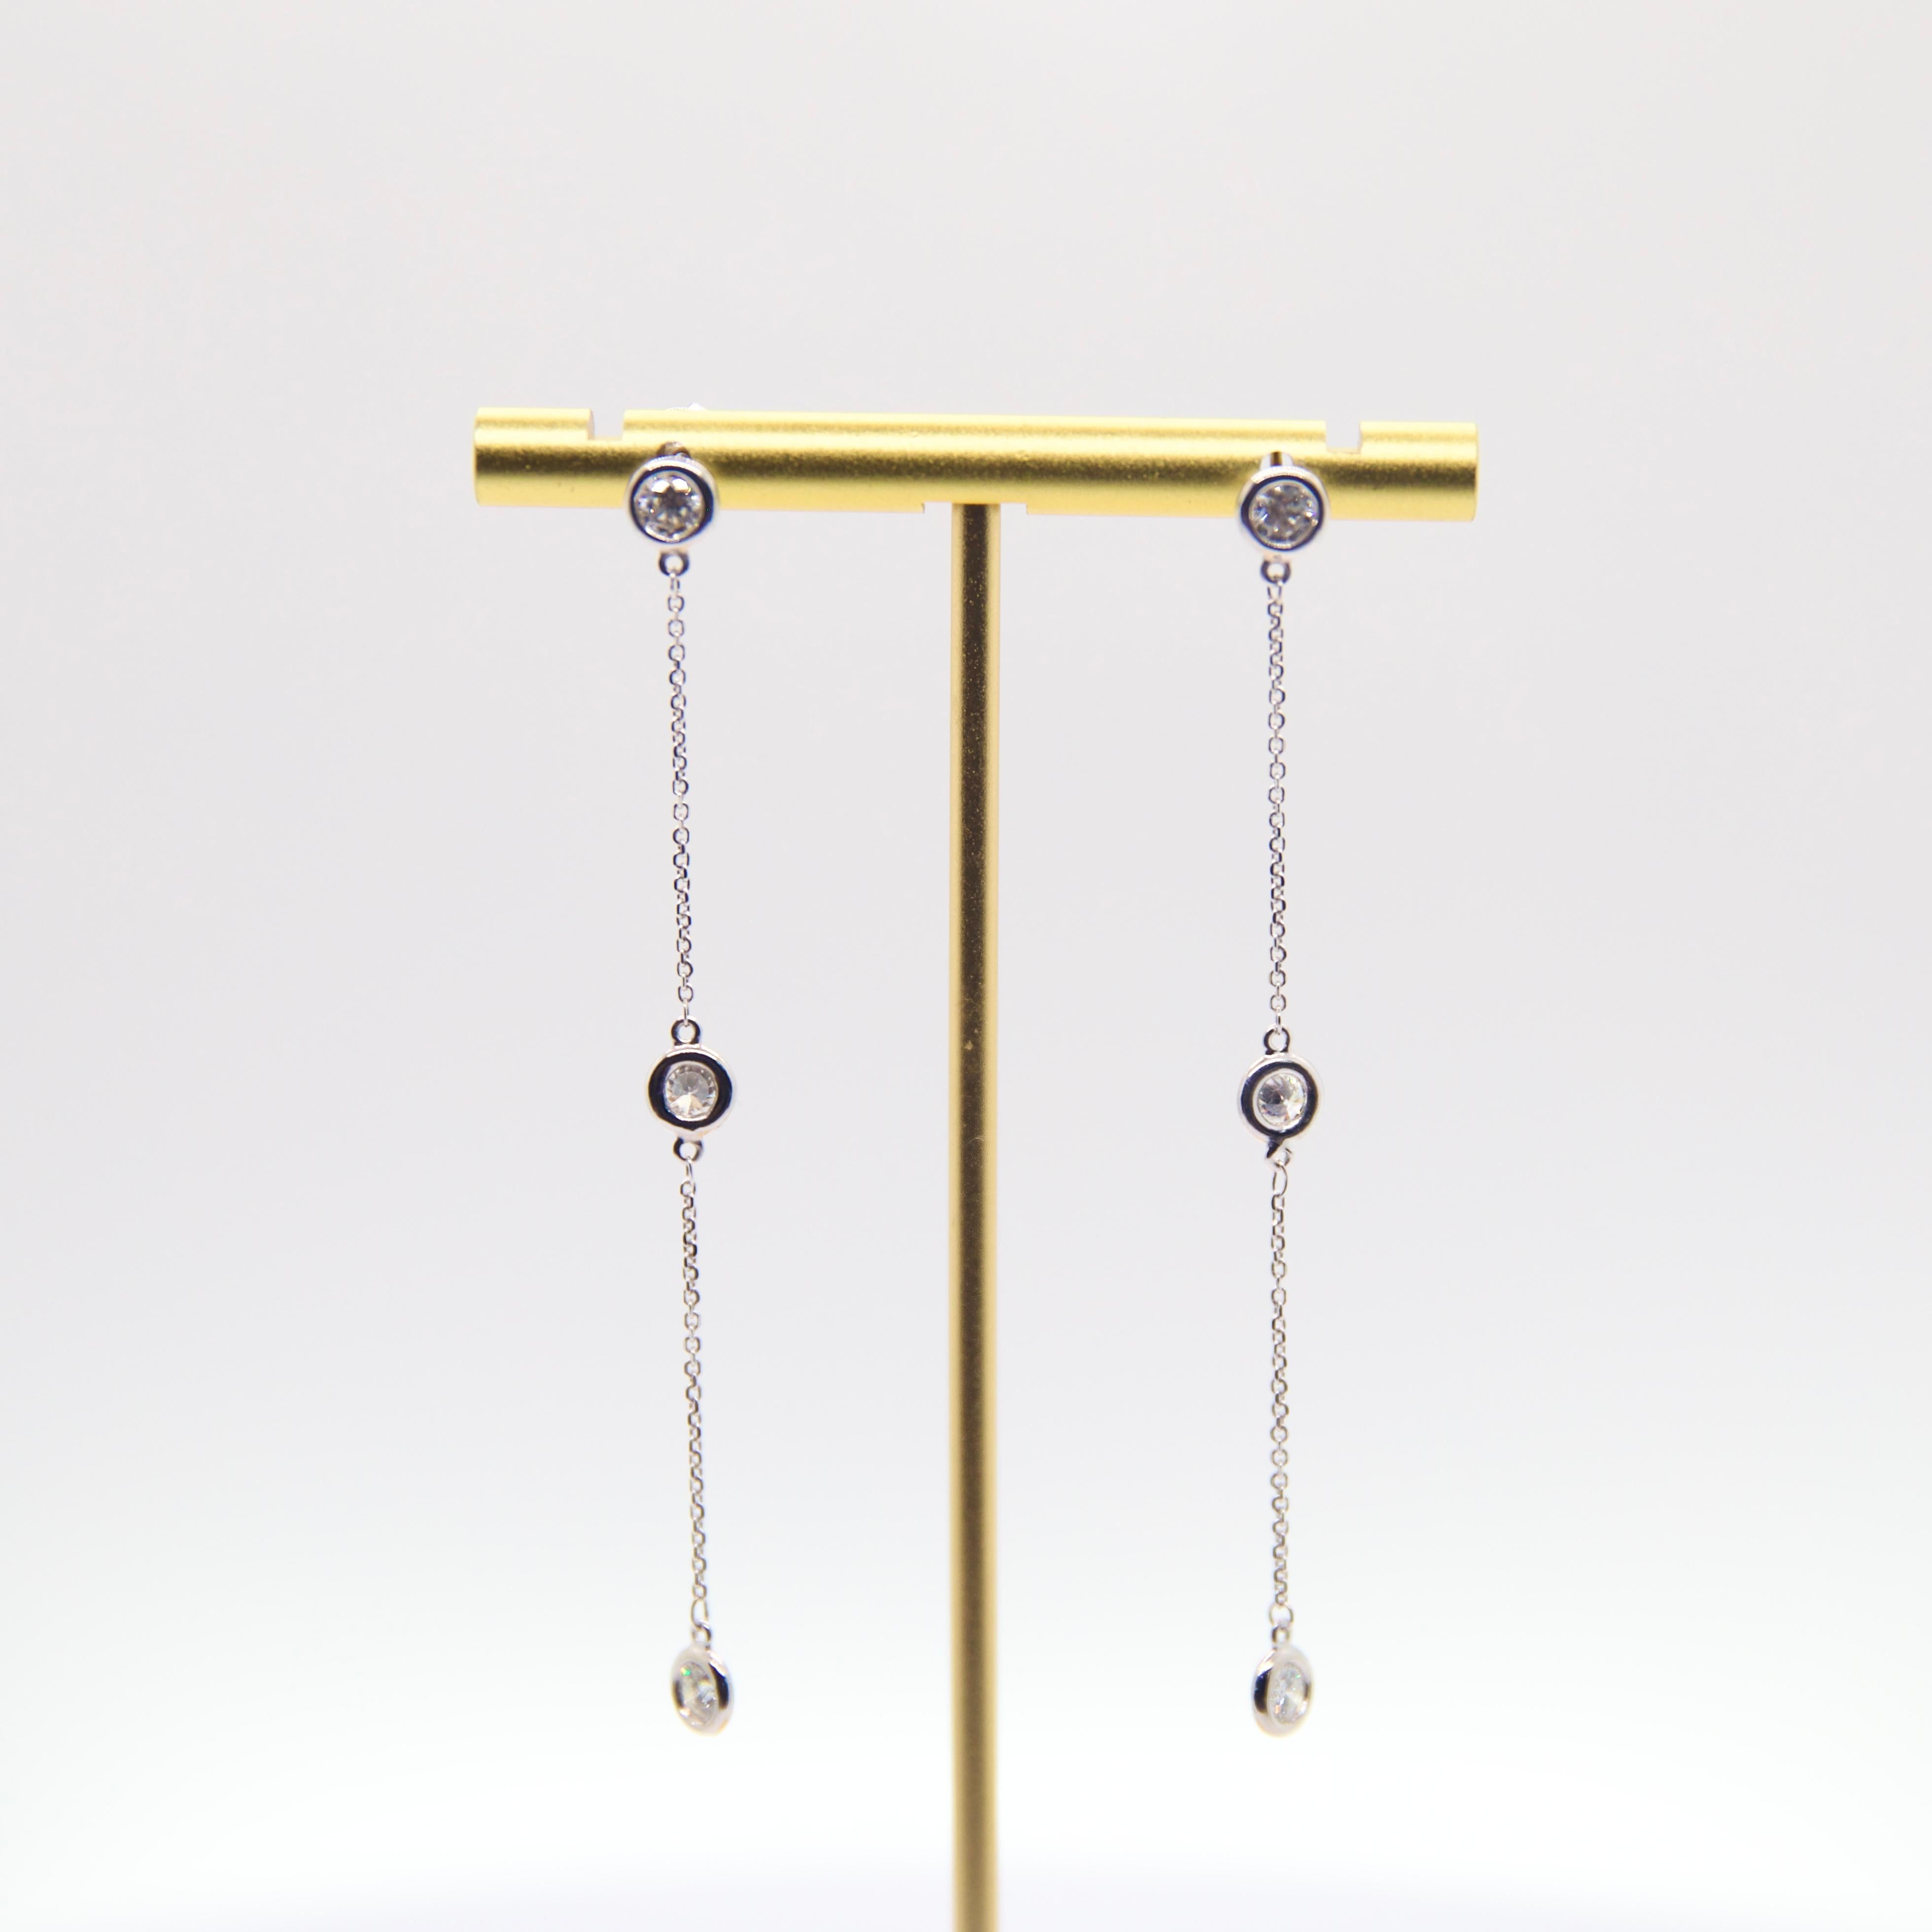 0.20 carat each diamond stationed in a 14k white gold bezel

Total weight: 1.20 carat

GHSI1 quality diamond

14k white gold cable chain 

Push back post

3 inch drop

Original designs by Elsa Peretti, this earring is reimagined and made for sole